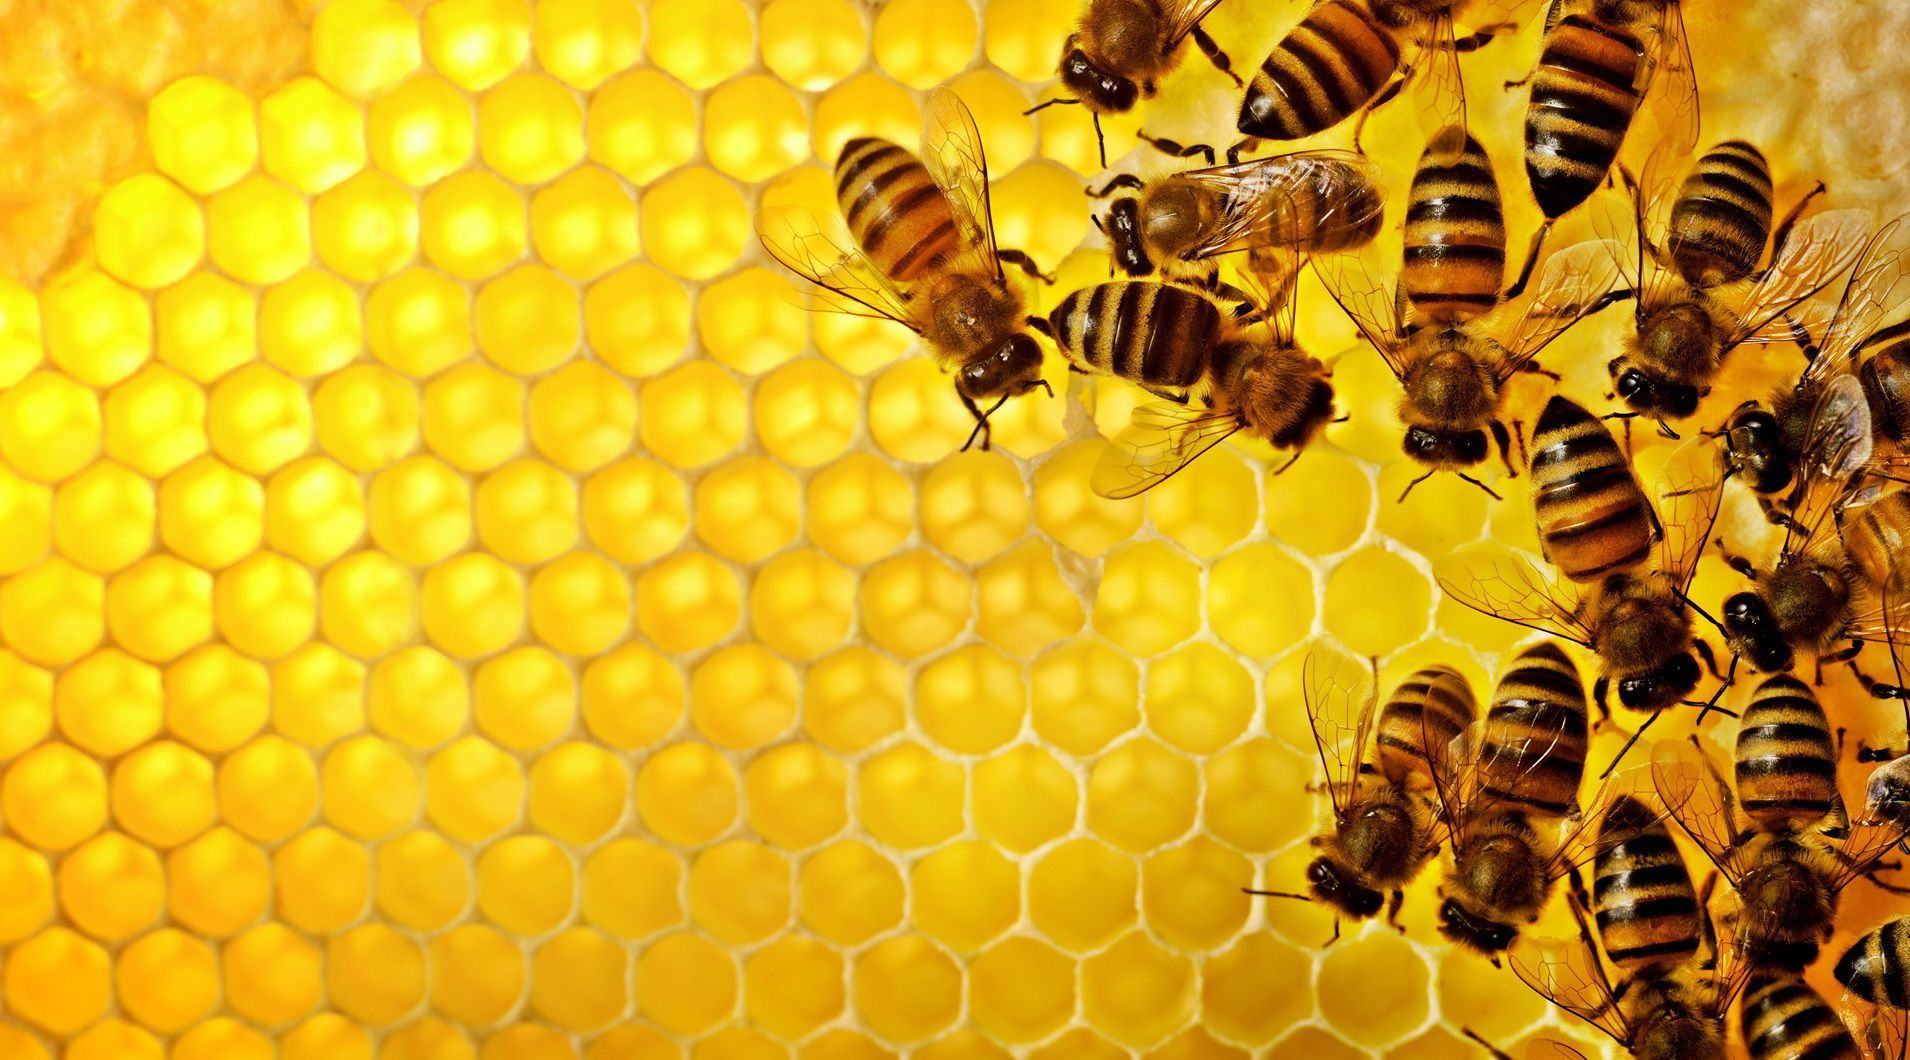 Bees on a honeycomb. - Bee